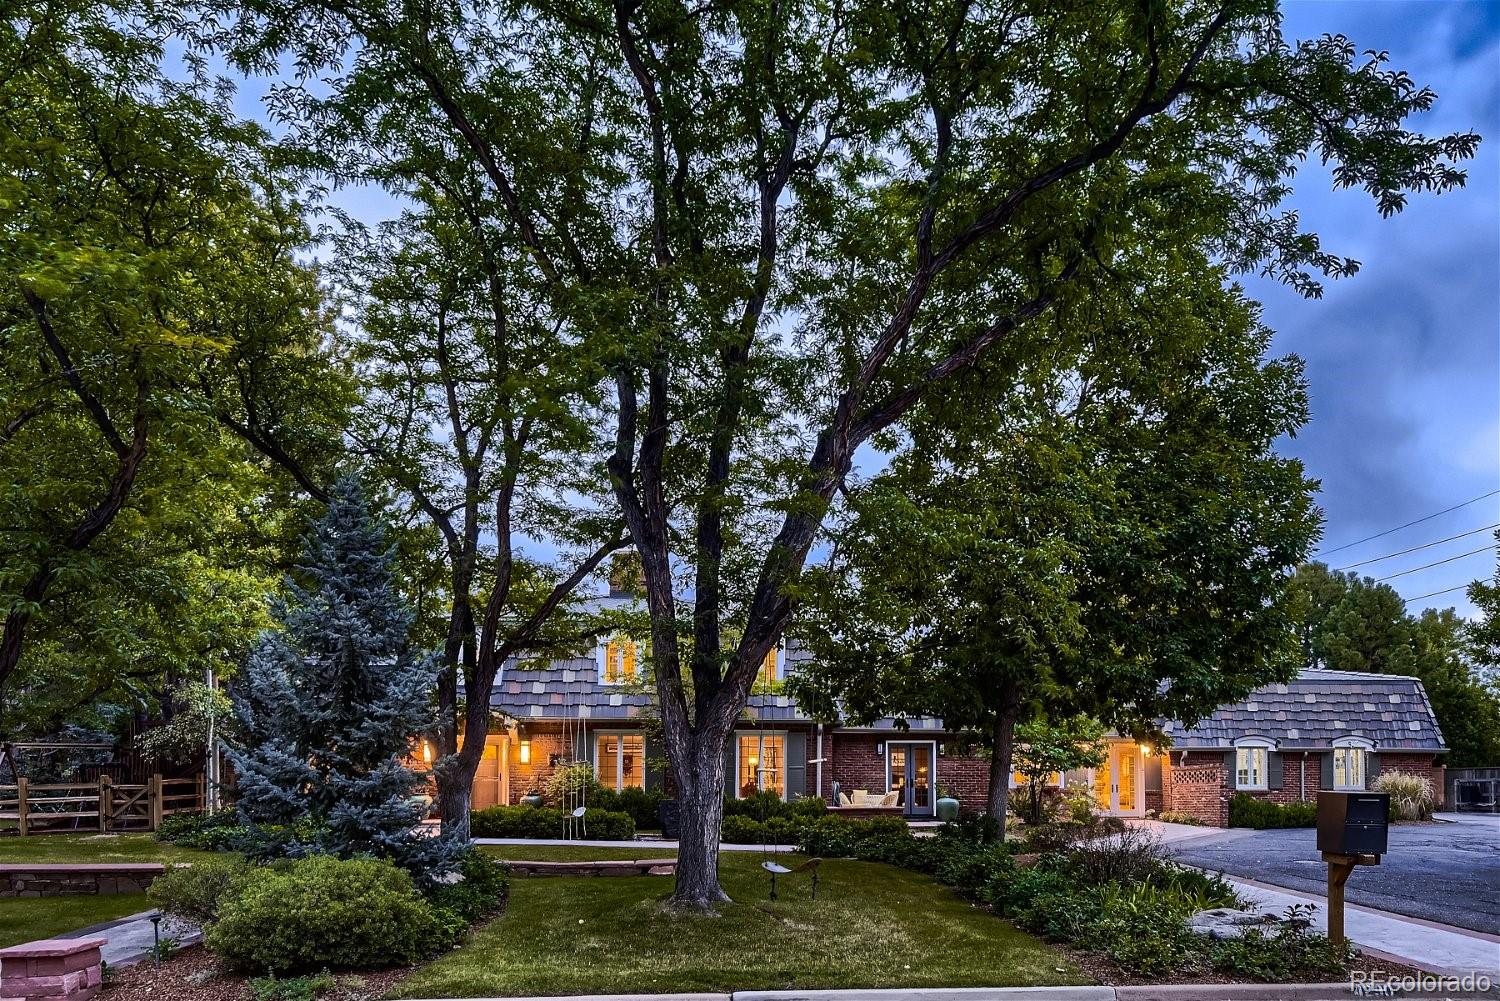 4290 s hudson parkway, englewood sold home. Closed on 2024-05-01 for $3,000,000.